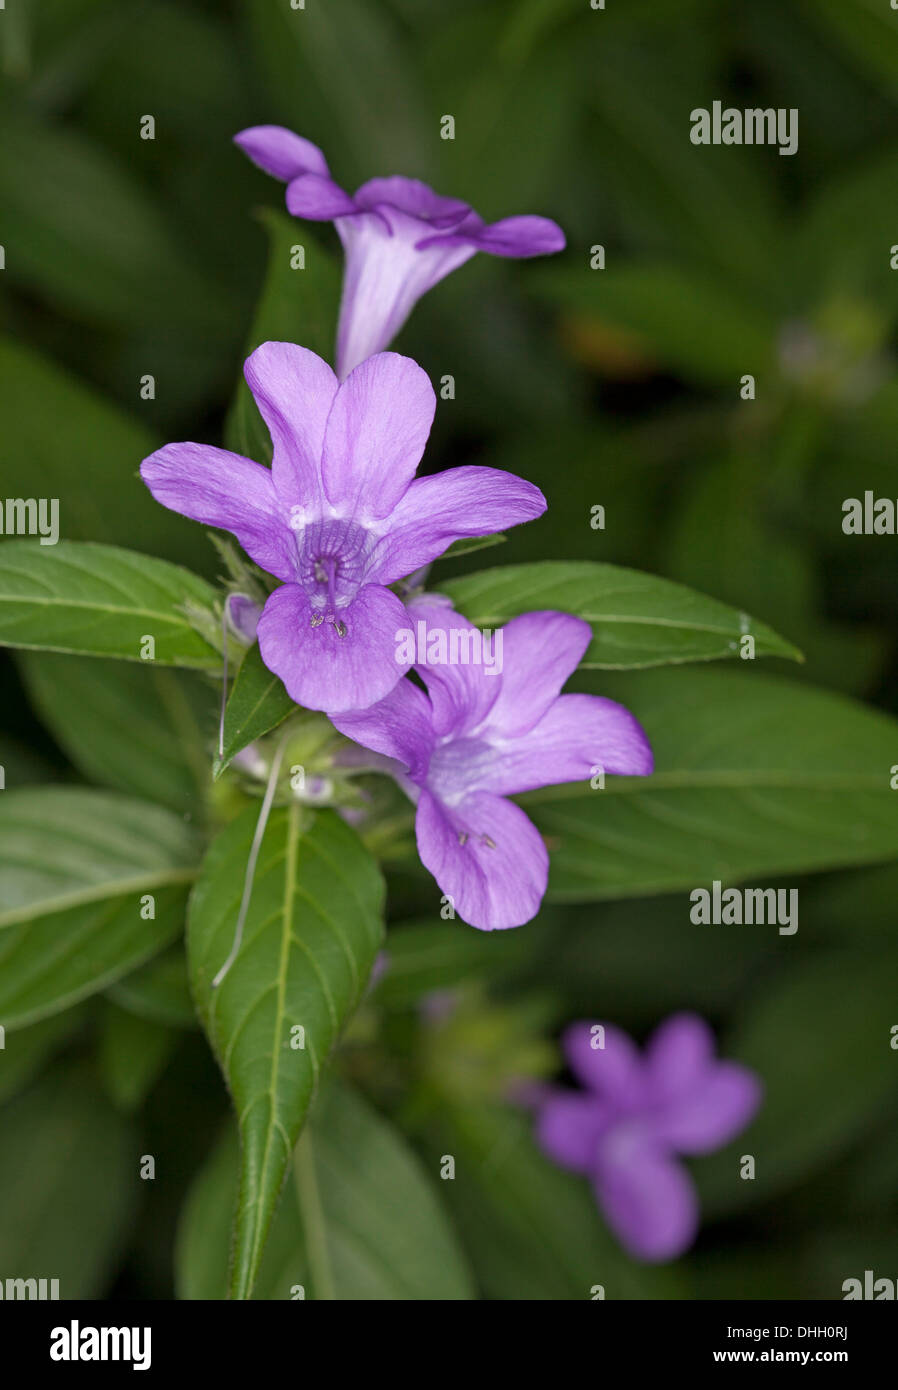 Close up of beautiful purple flowers and green hairy leaves of Barleria cristata growing in a sub-tropical garden Stock Photo